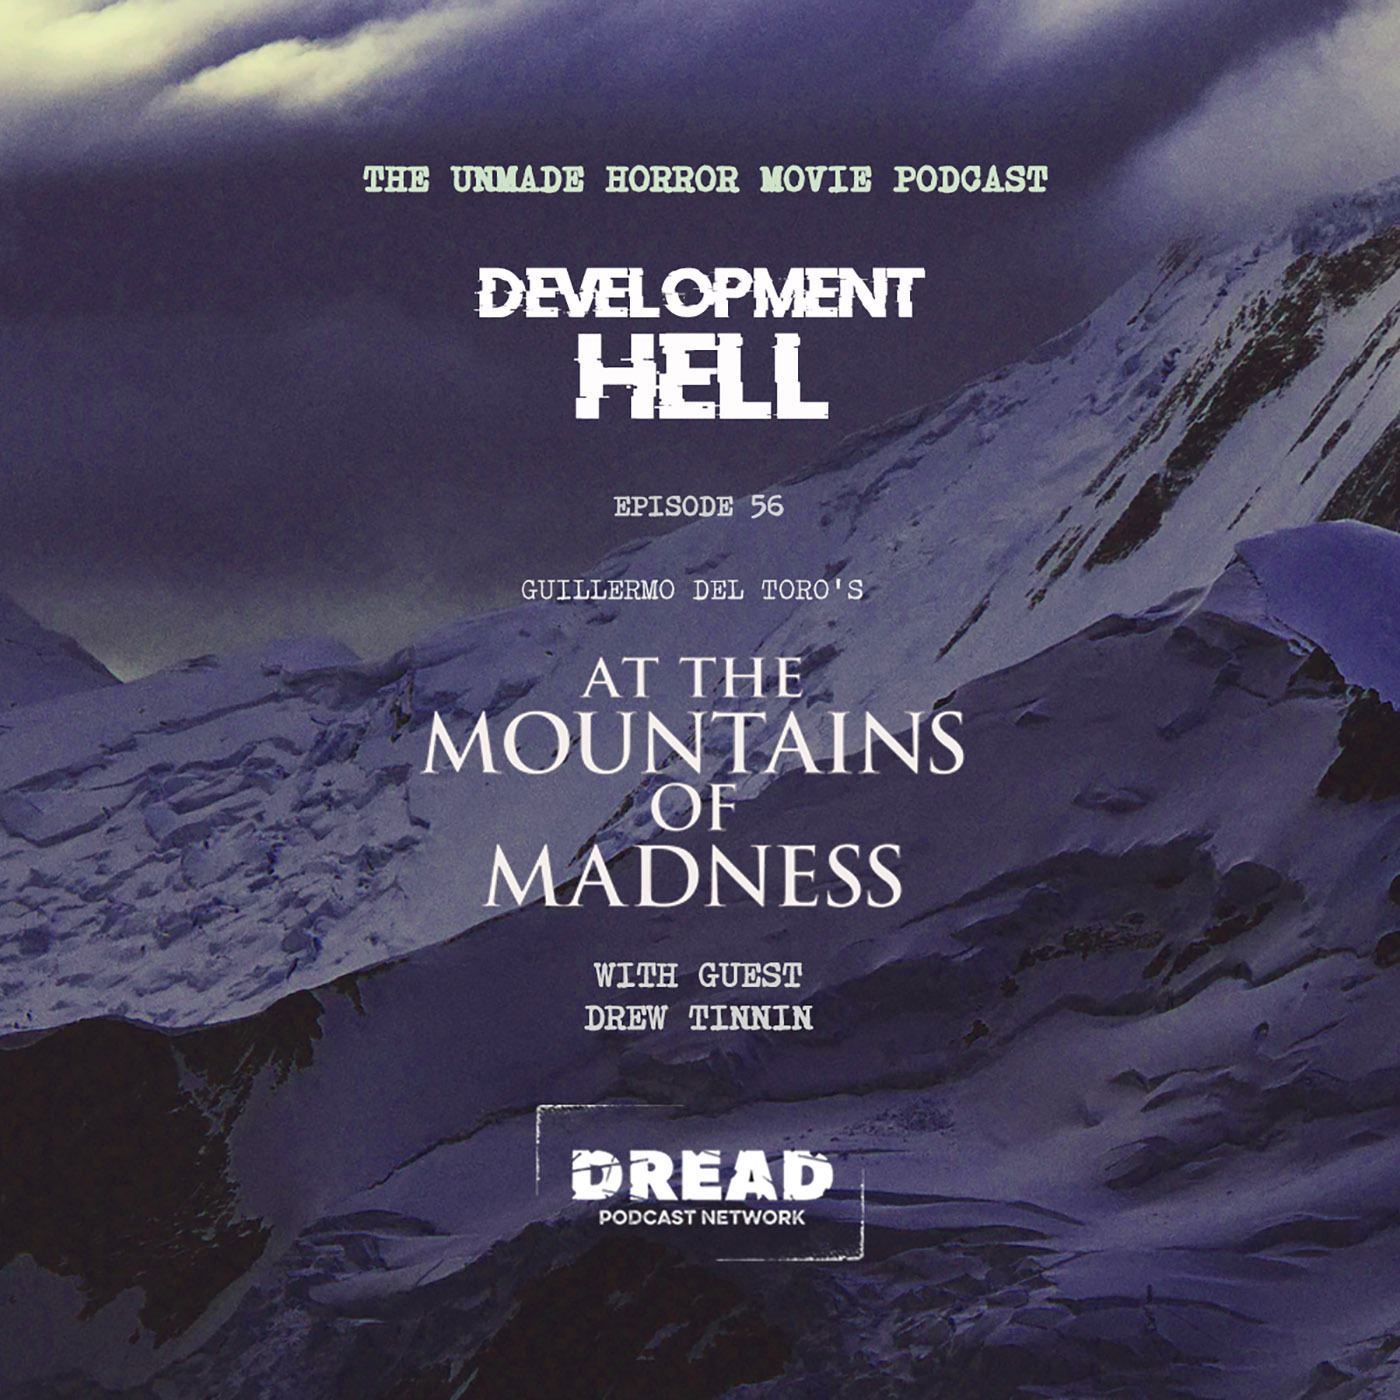 Guillermo del Toro’s AT THE MOUNTAINS OF MADNESS (with Drew Tinnin)